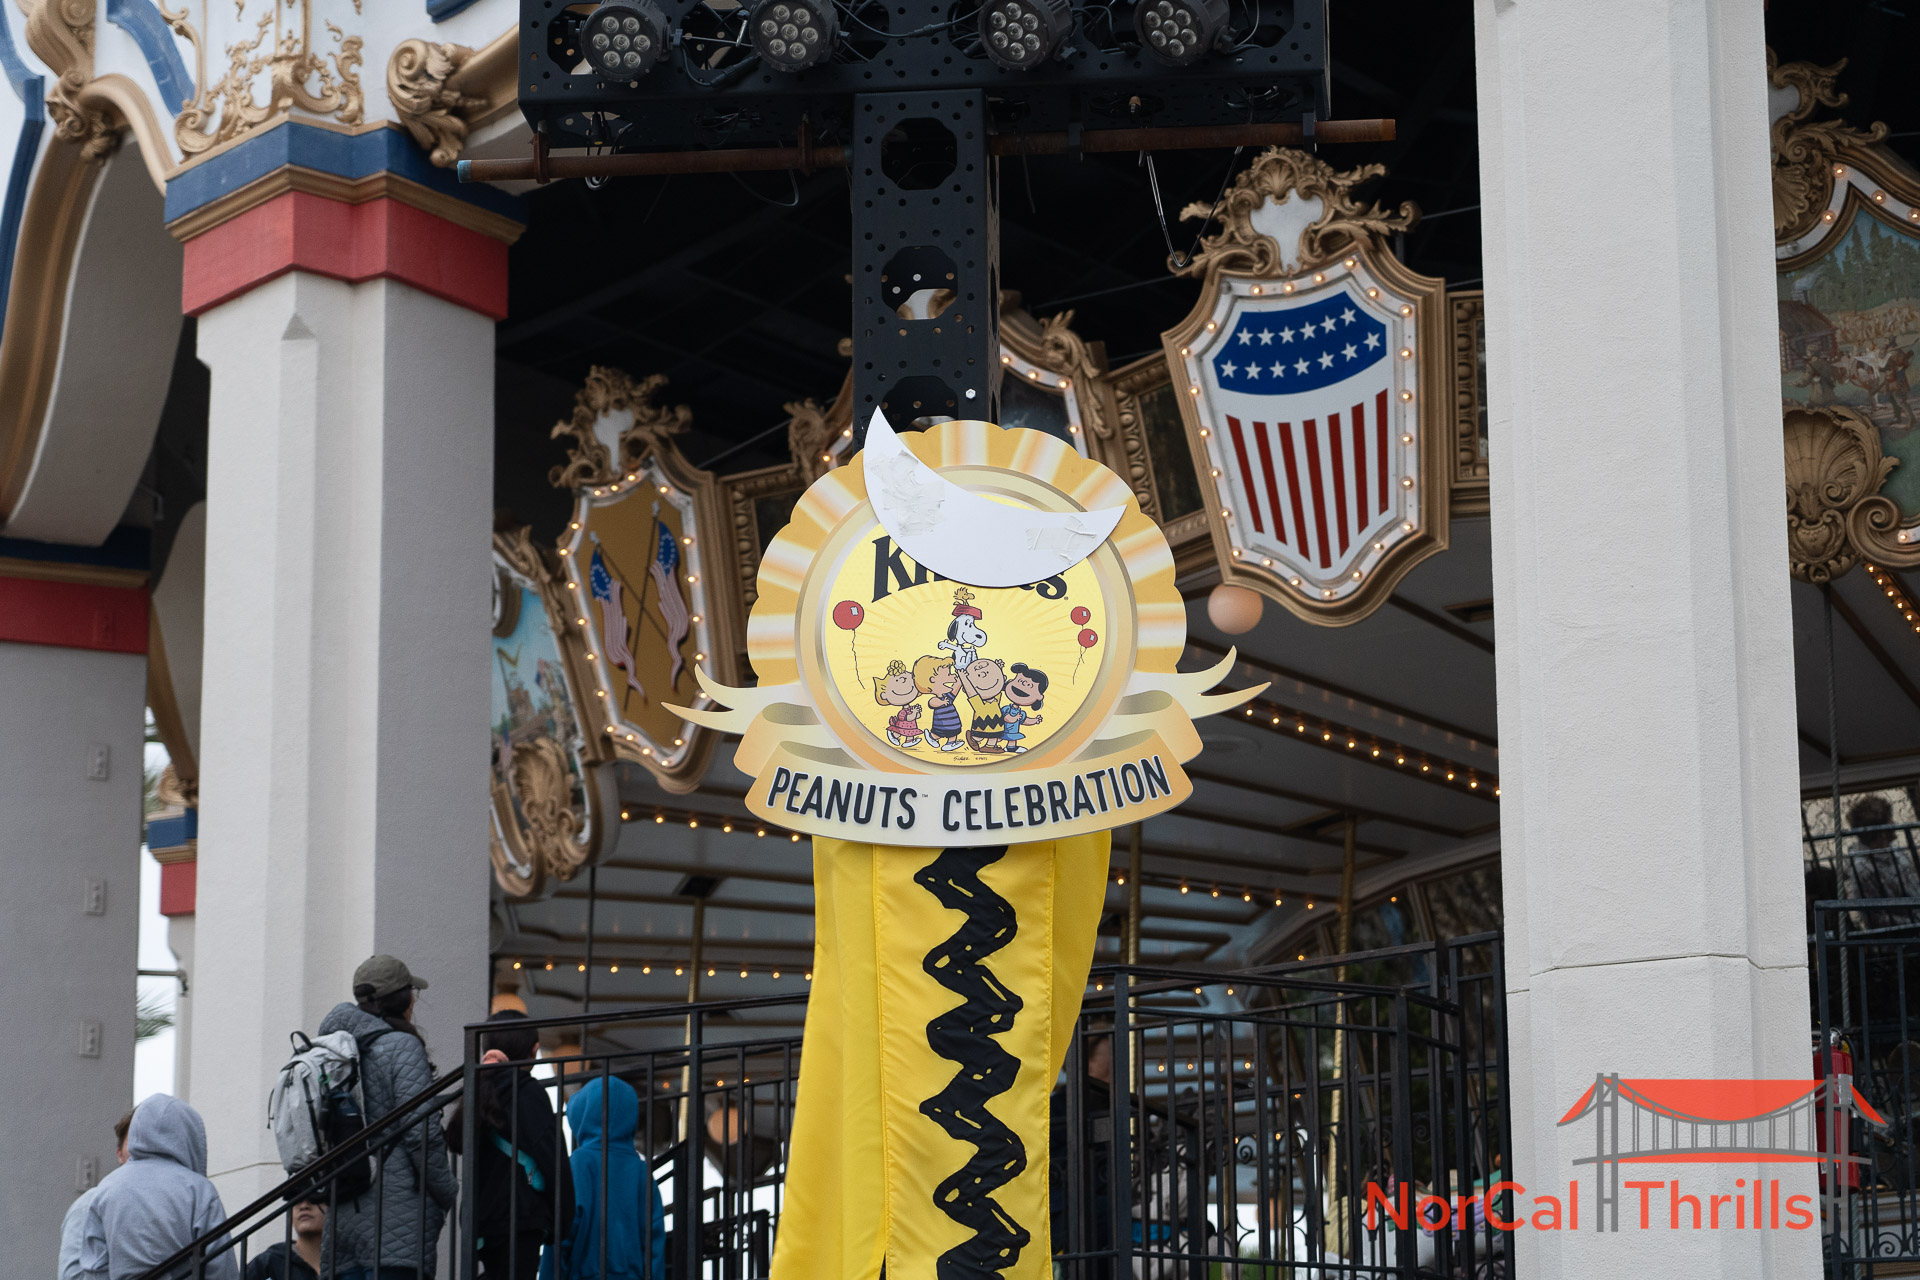 Peanuts Celebration | Decorations and More